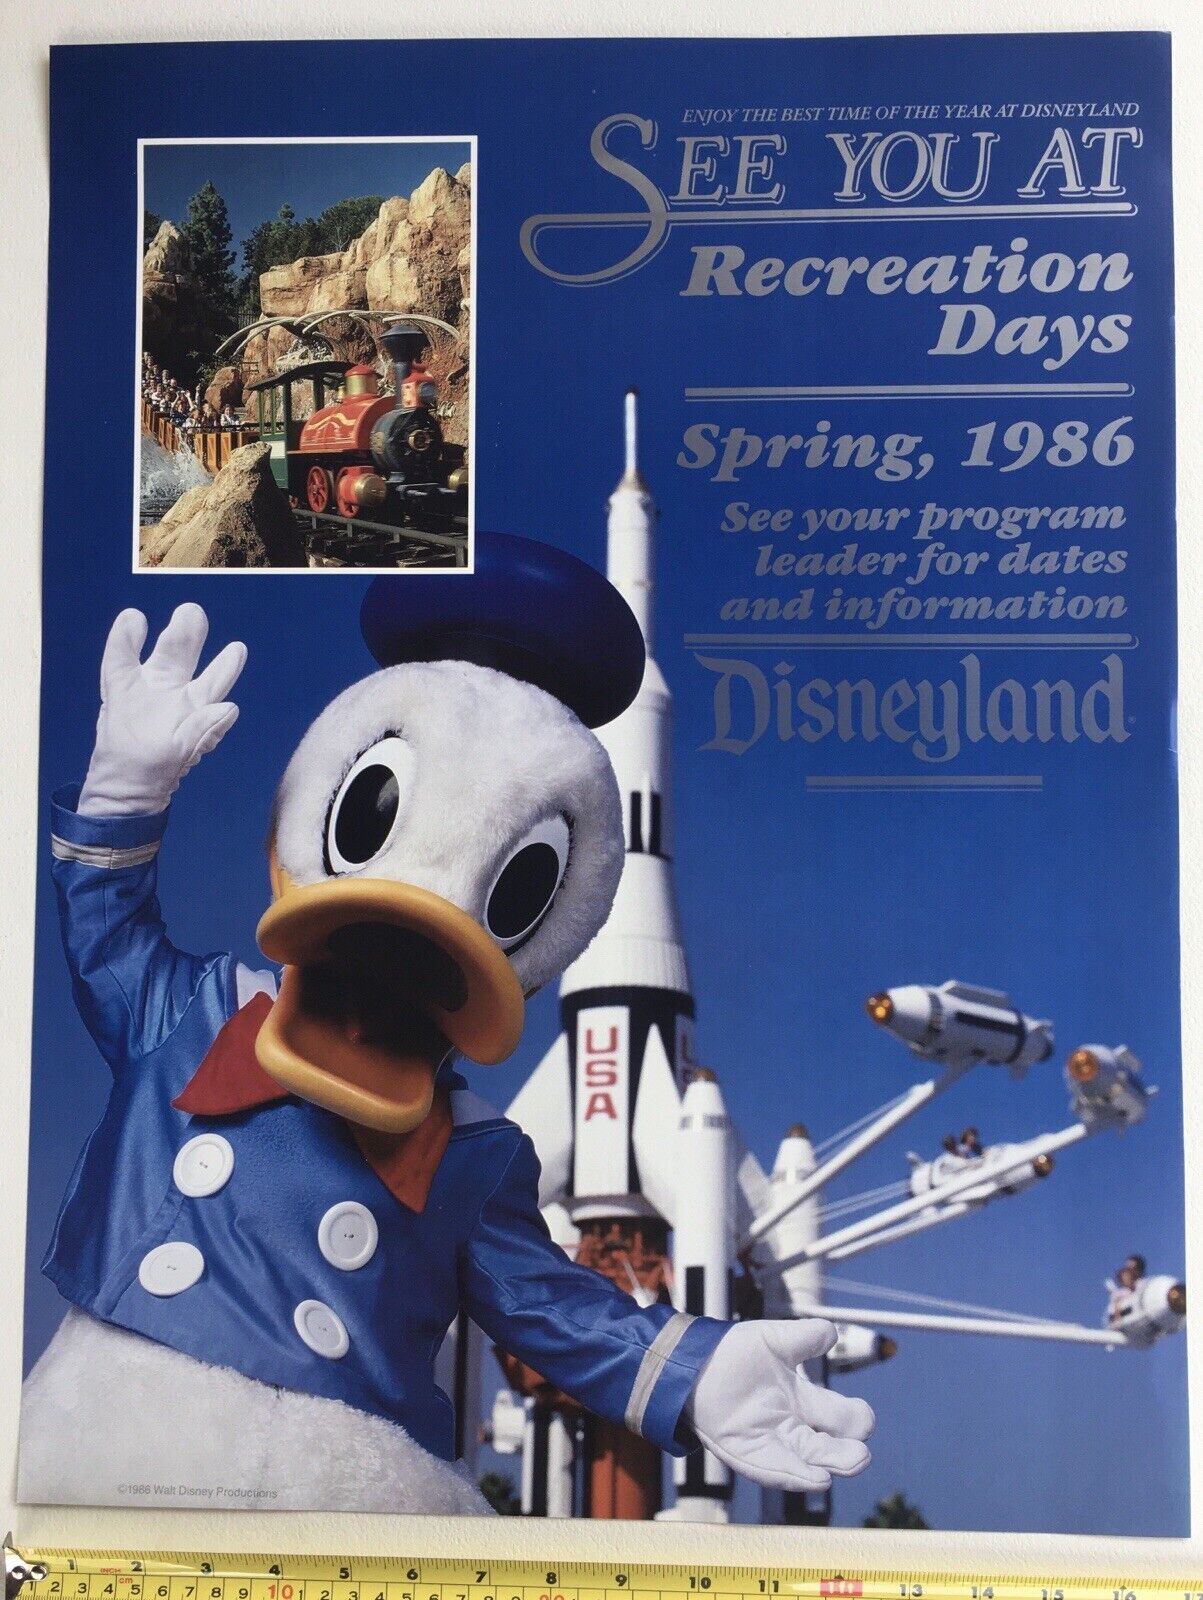 Rare Spring 1986 Recreation Days at Disneyland Poster- excellent/ mint condition